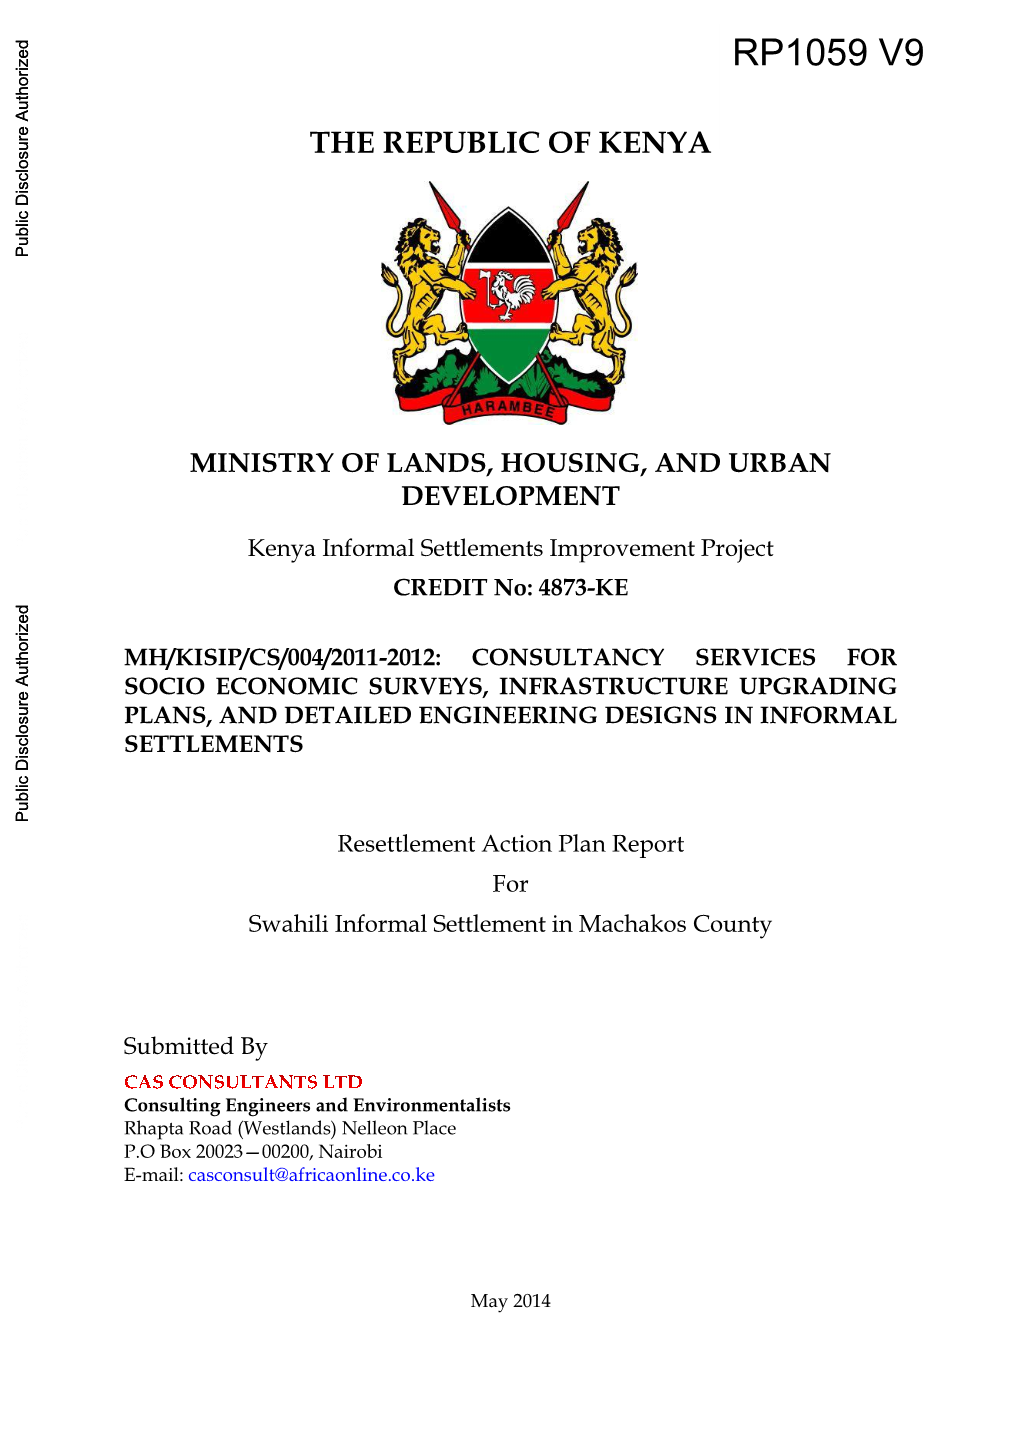 The Republic of Kenya Ministry of Lands